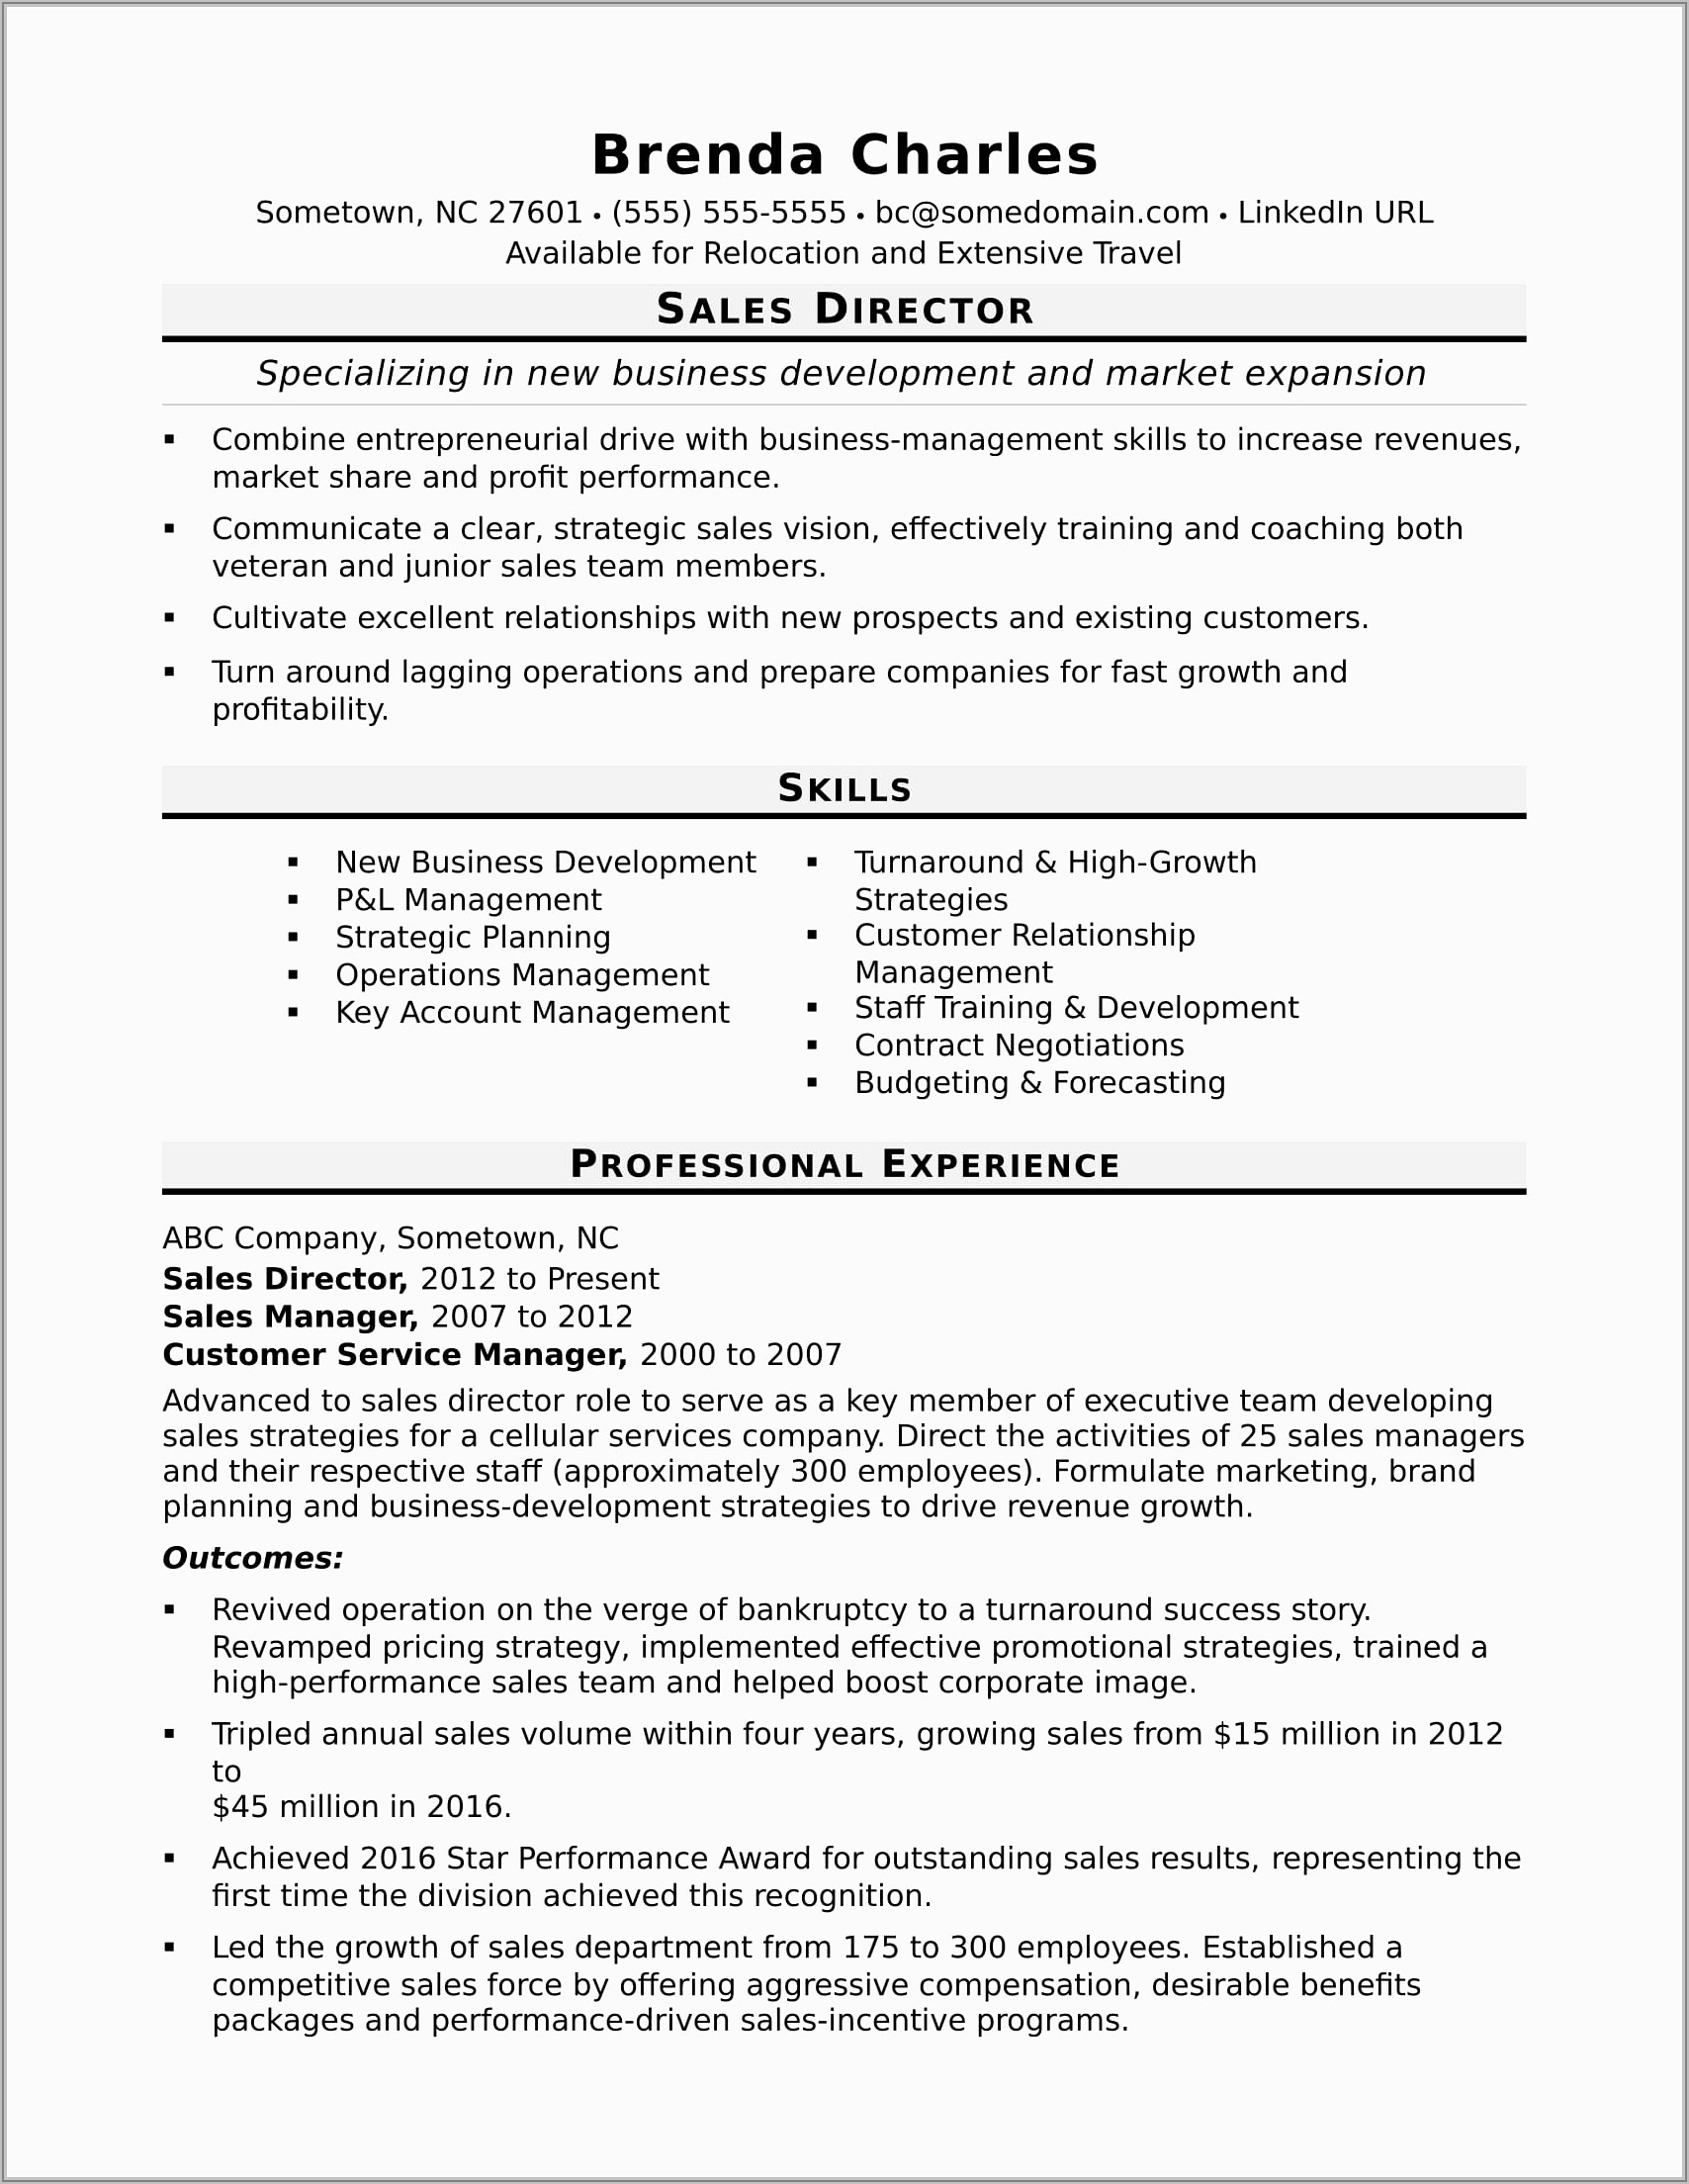 Sample Resume For Sales Executive Fmcg